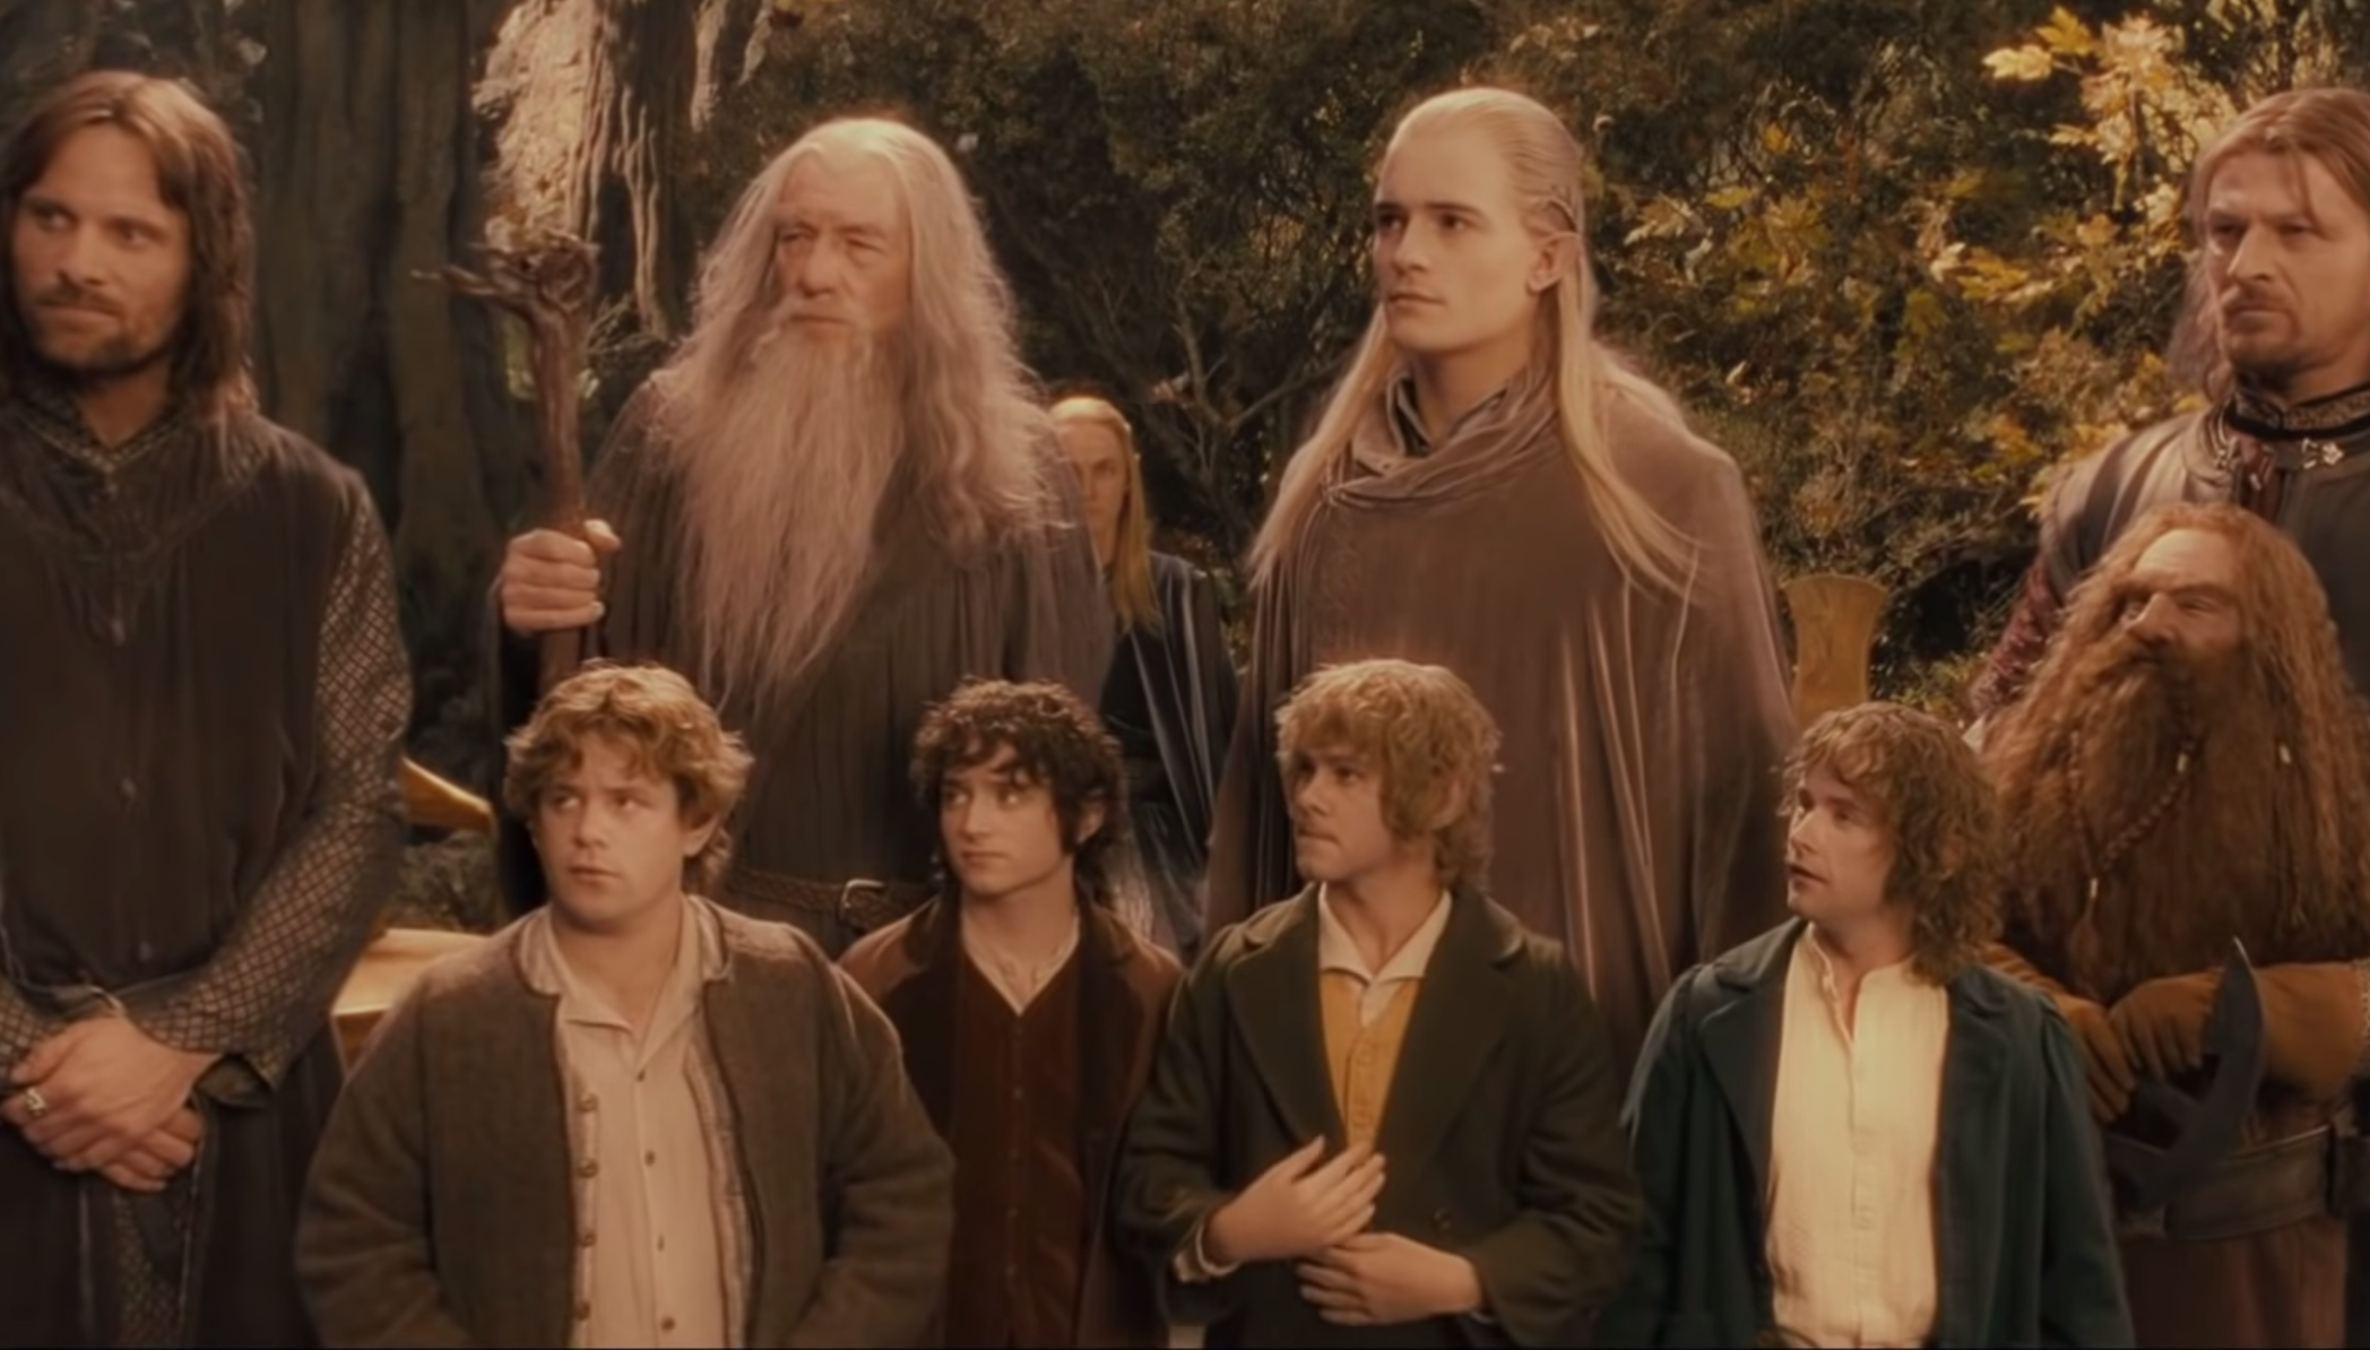 Love 'Lord of the Rings'? Audition for these Fantasy + Amazon Gigs